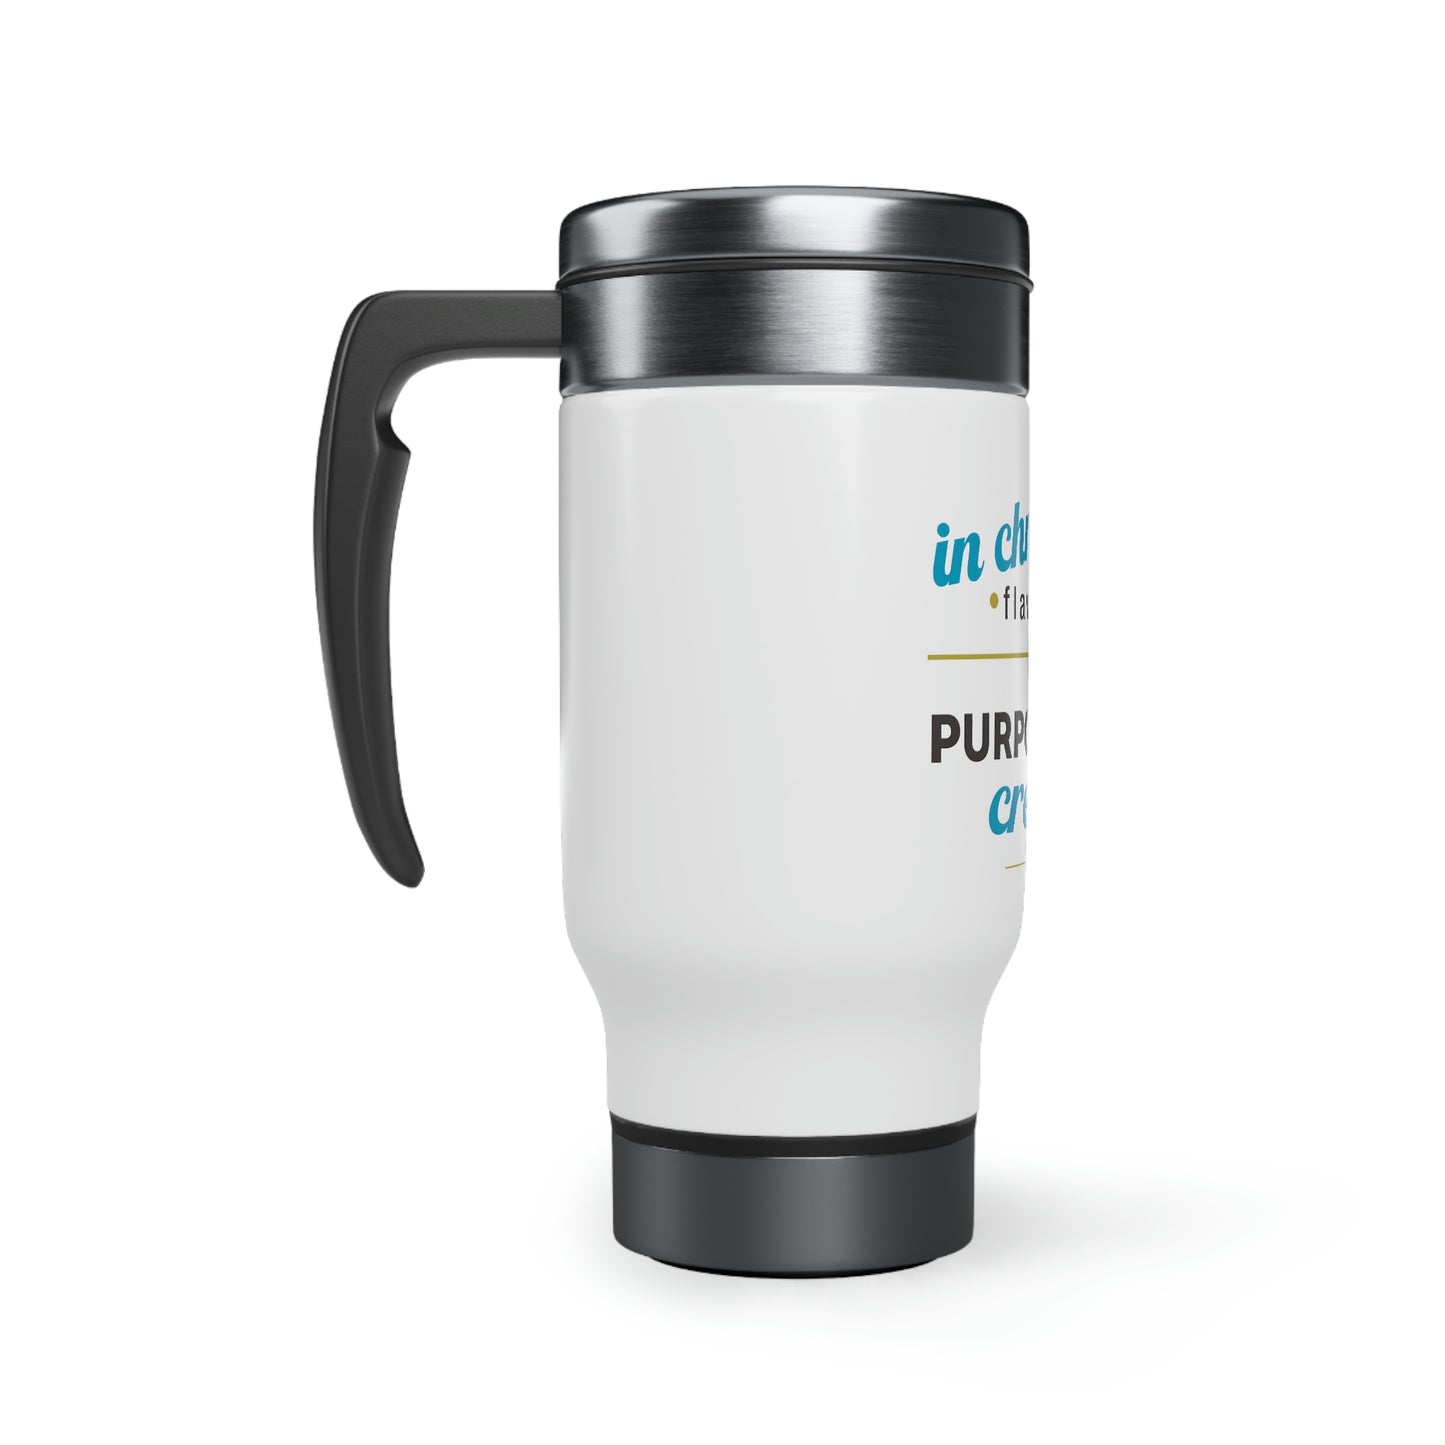 In Christ I Am Flawlessly and Purposefully Created Travel Mug with Handle, 14oz